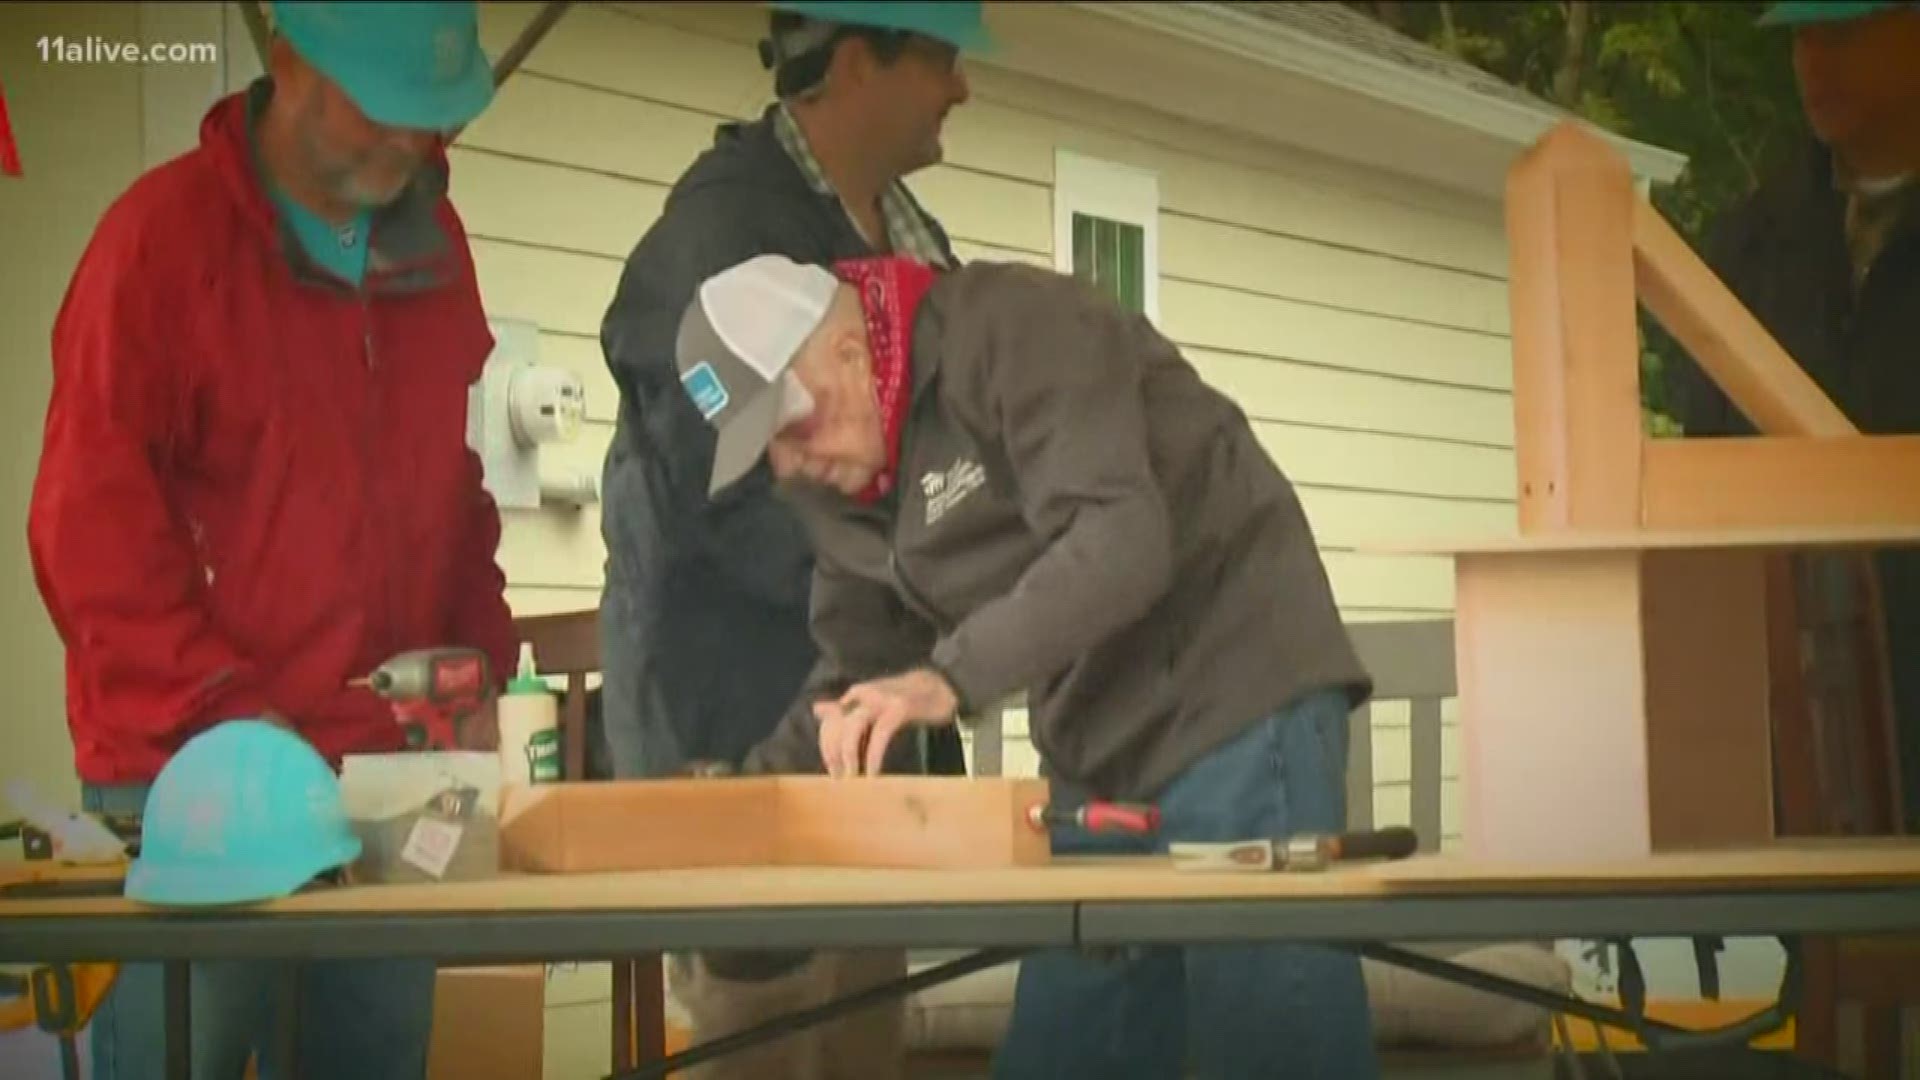 The hammers were swinging, and the volunteers’ efforts were underway Monday in Nashville during the Jimmy and Rosalynn Carter Work Project with Habitat for Humanity.